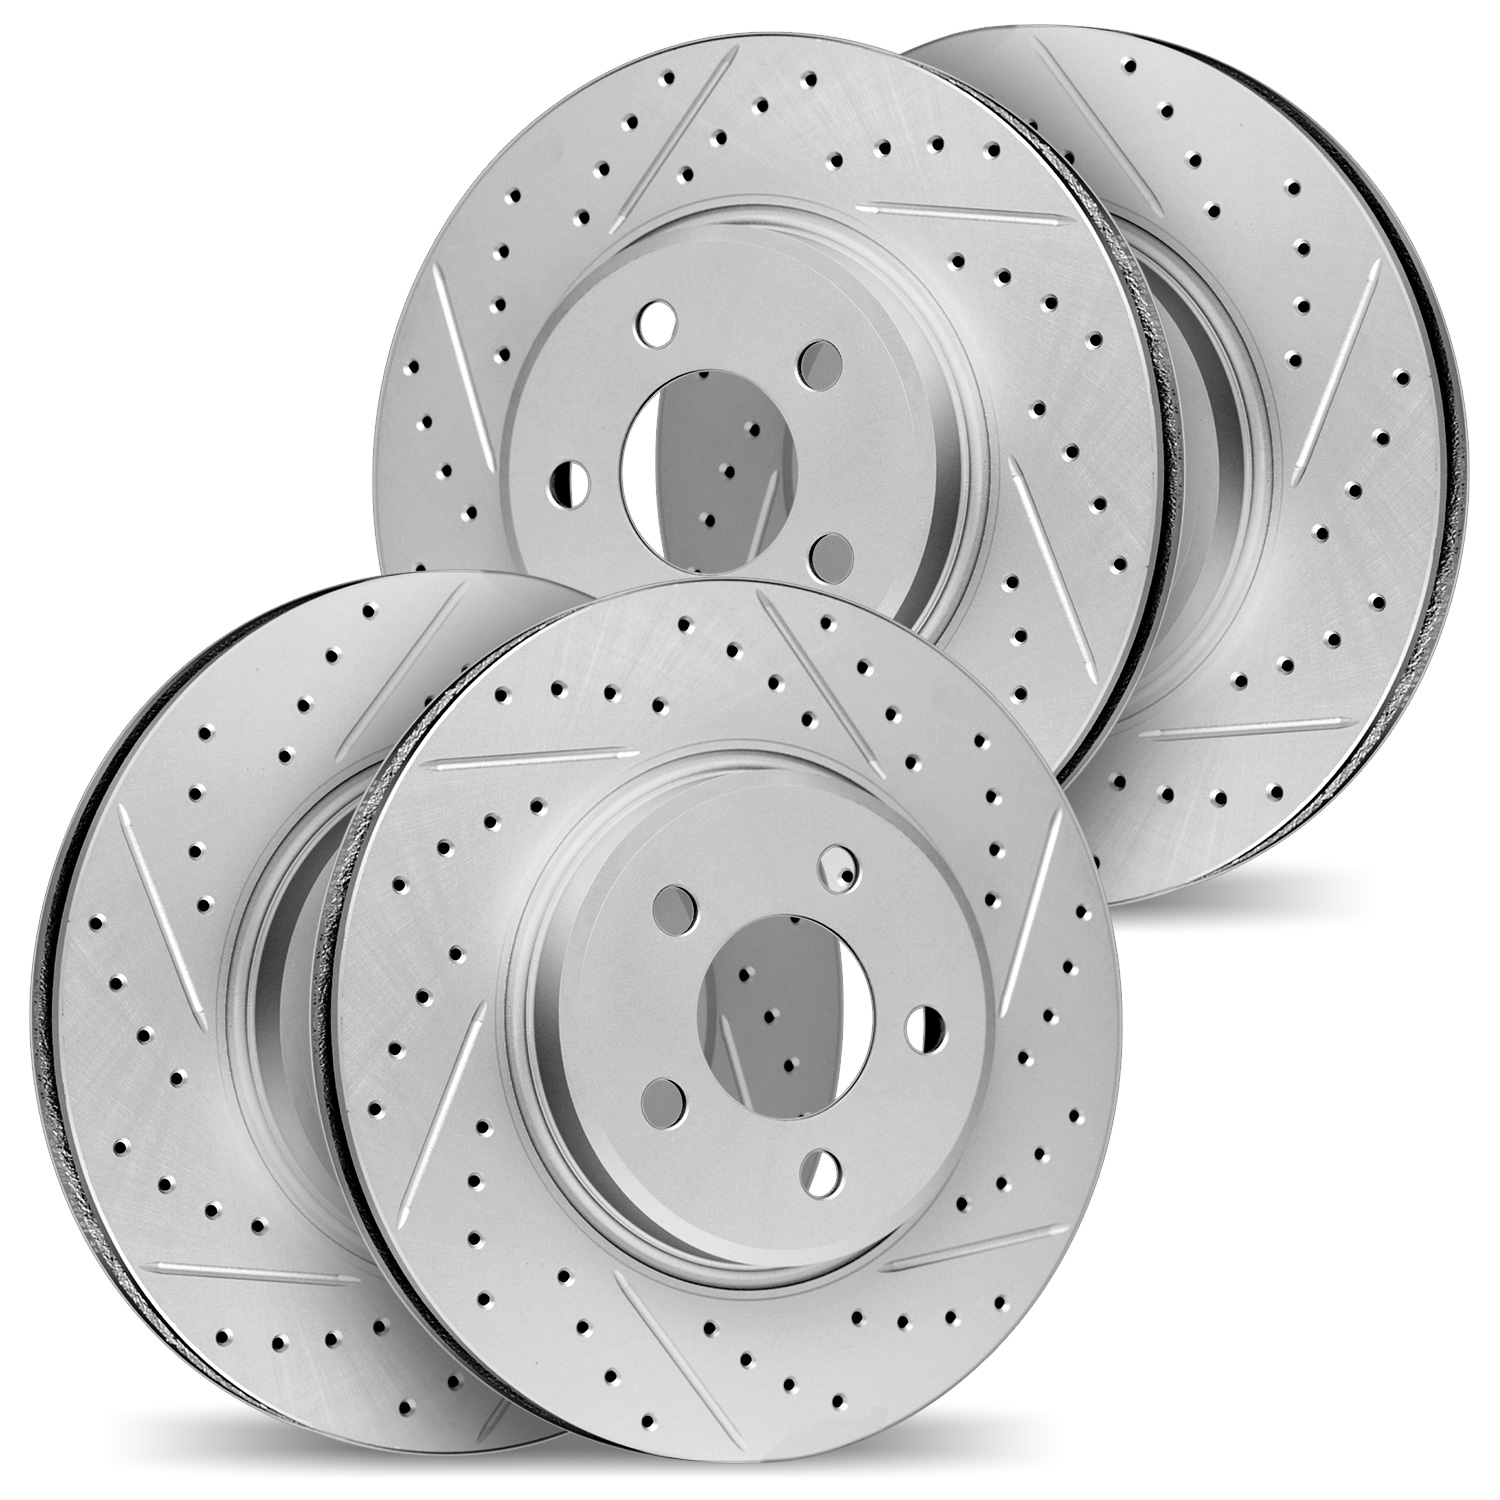 2004-75022 Geoperformance Drilled/Slotted Brake Rotors, Fits Select Lexus/Toyota/Scion, Position: Front and Rear